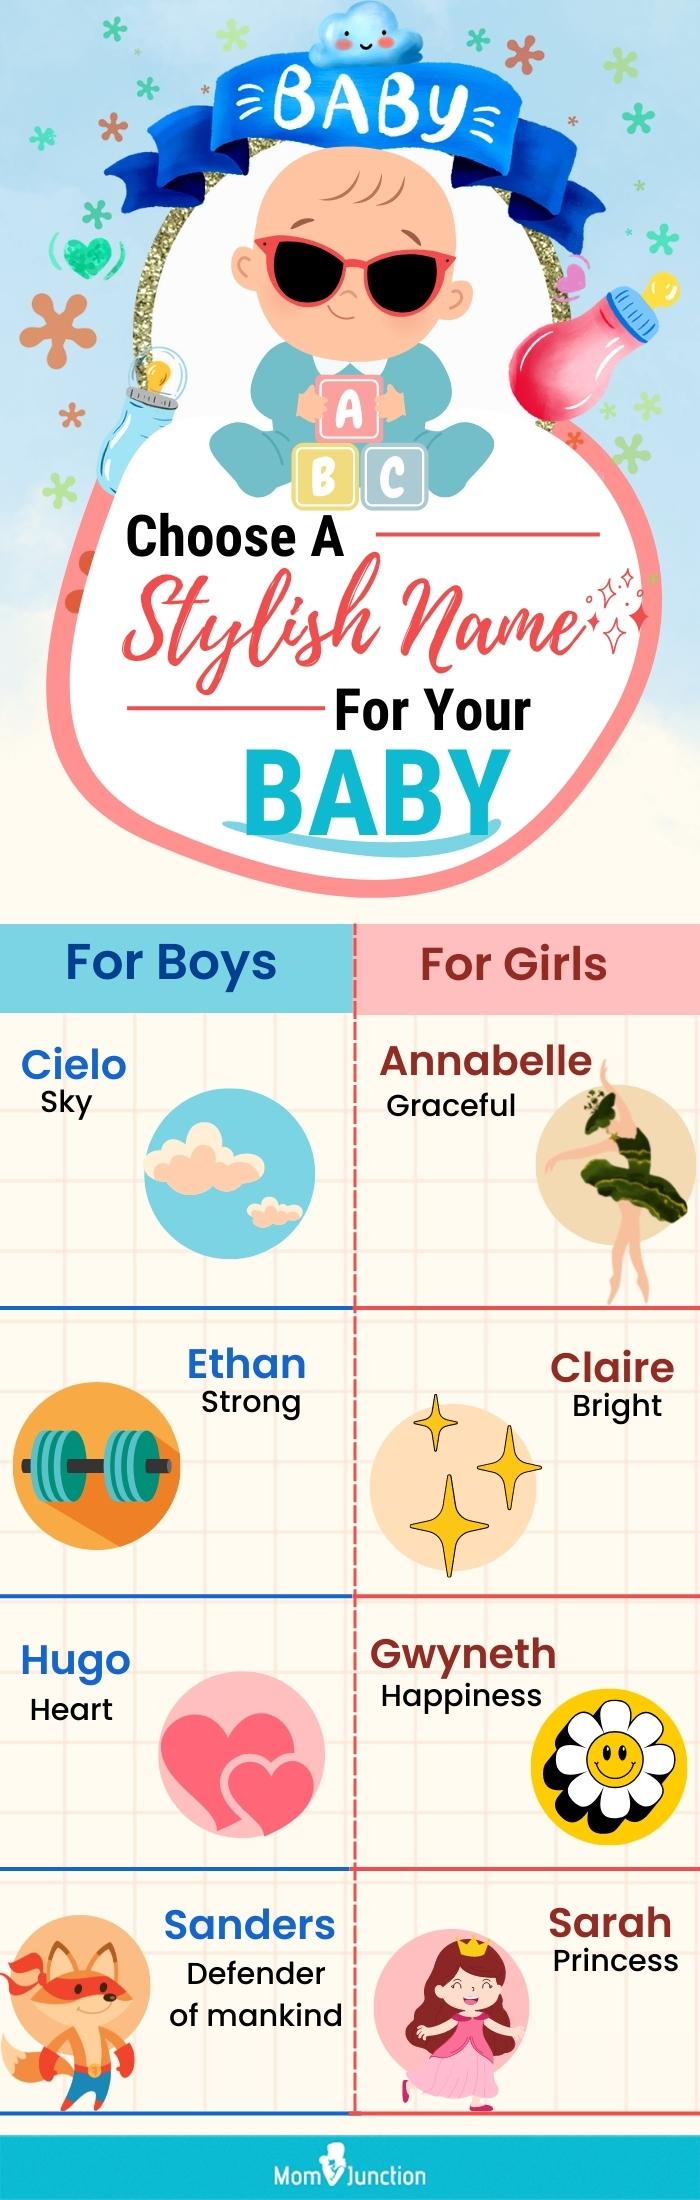 200 Baby Names That Start With 'B